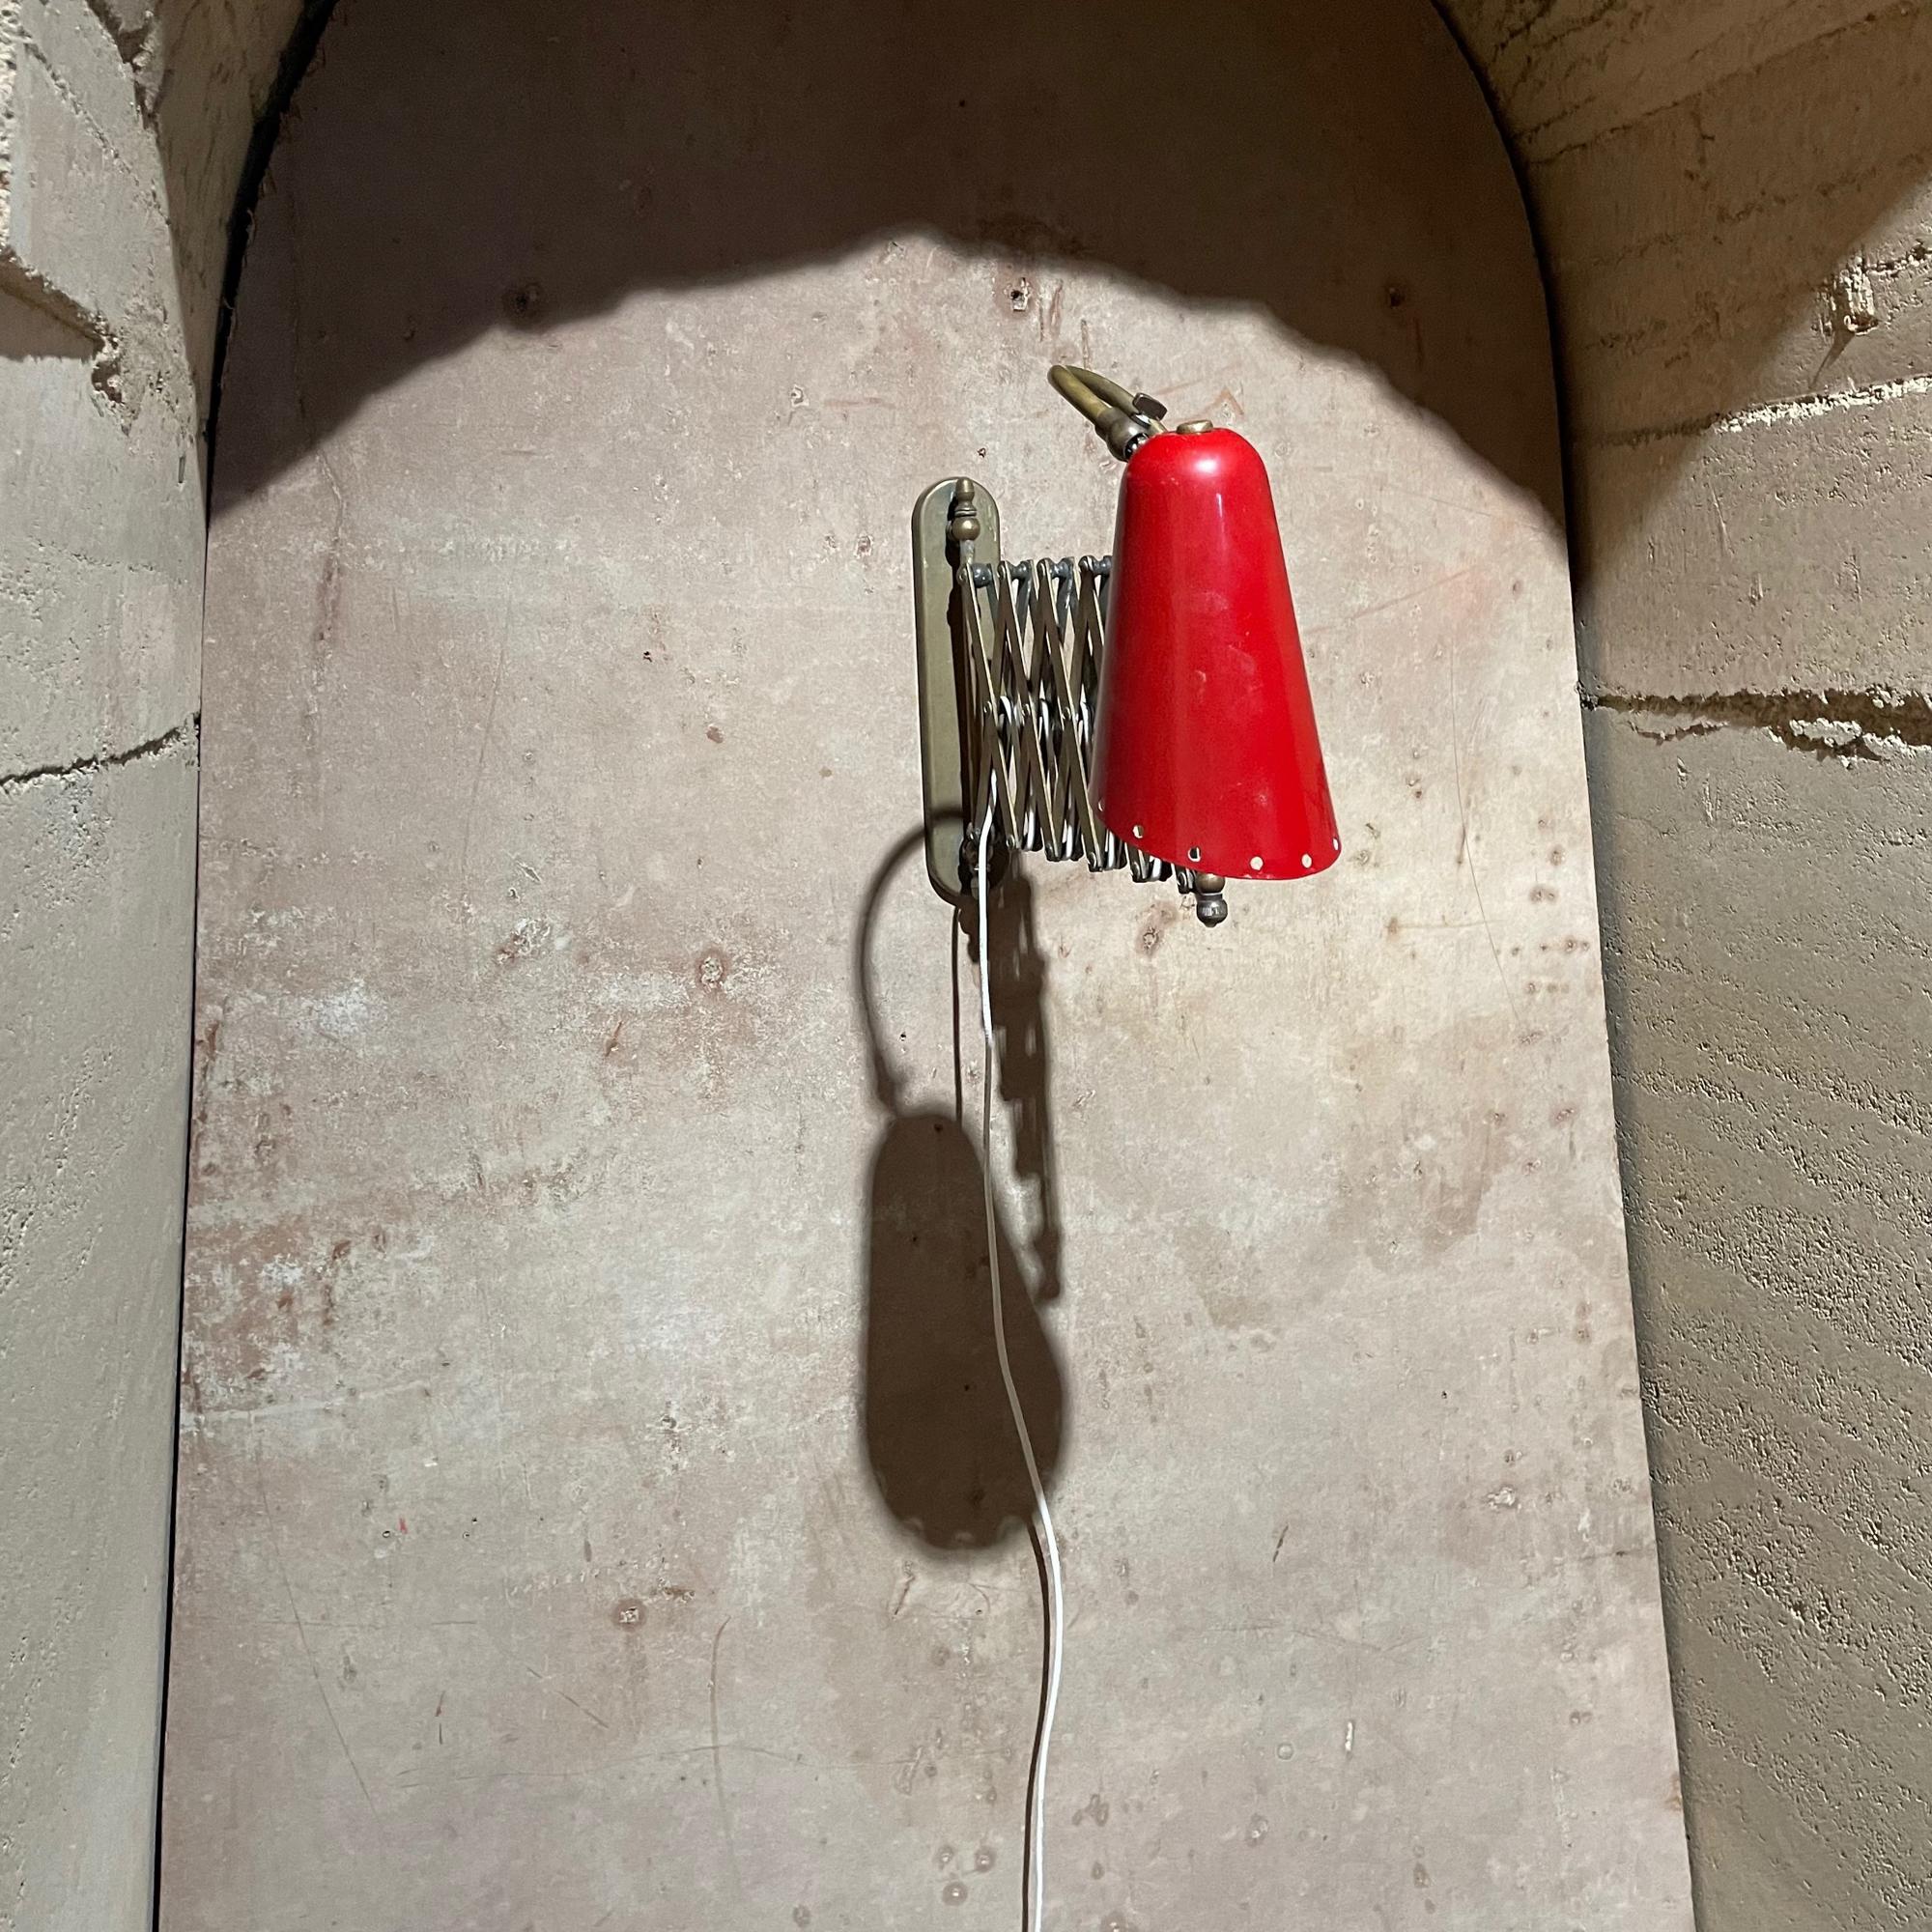 Italian Brass Red Scissor Wall Lamp Sconce ITALY 1950s
Red perforated cone shade. Unmarked. In the style of Stilnovo.
31 fully extended, 16 closed 11 h x 4.5 wide inches
Original Unrestored Vintage Preowned Condition.
Patina consistent with age and